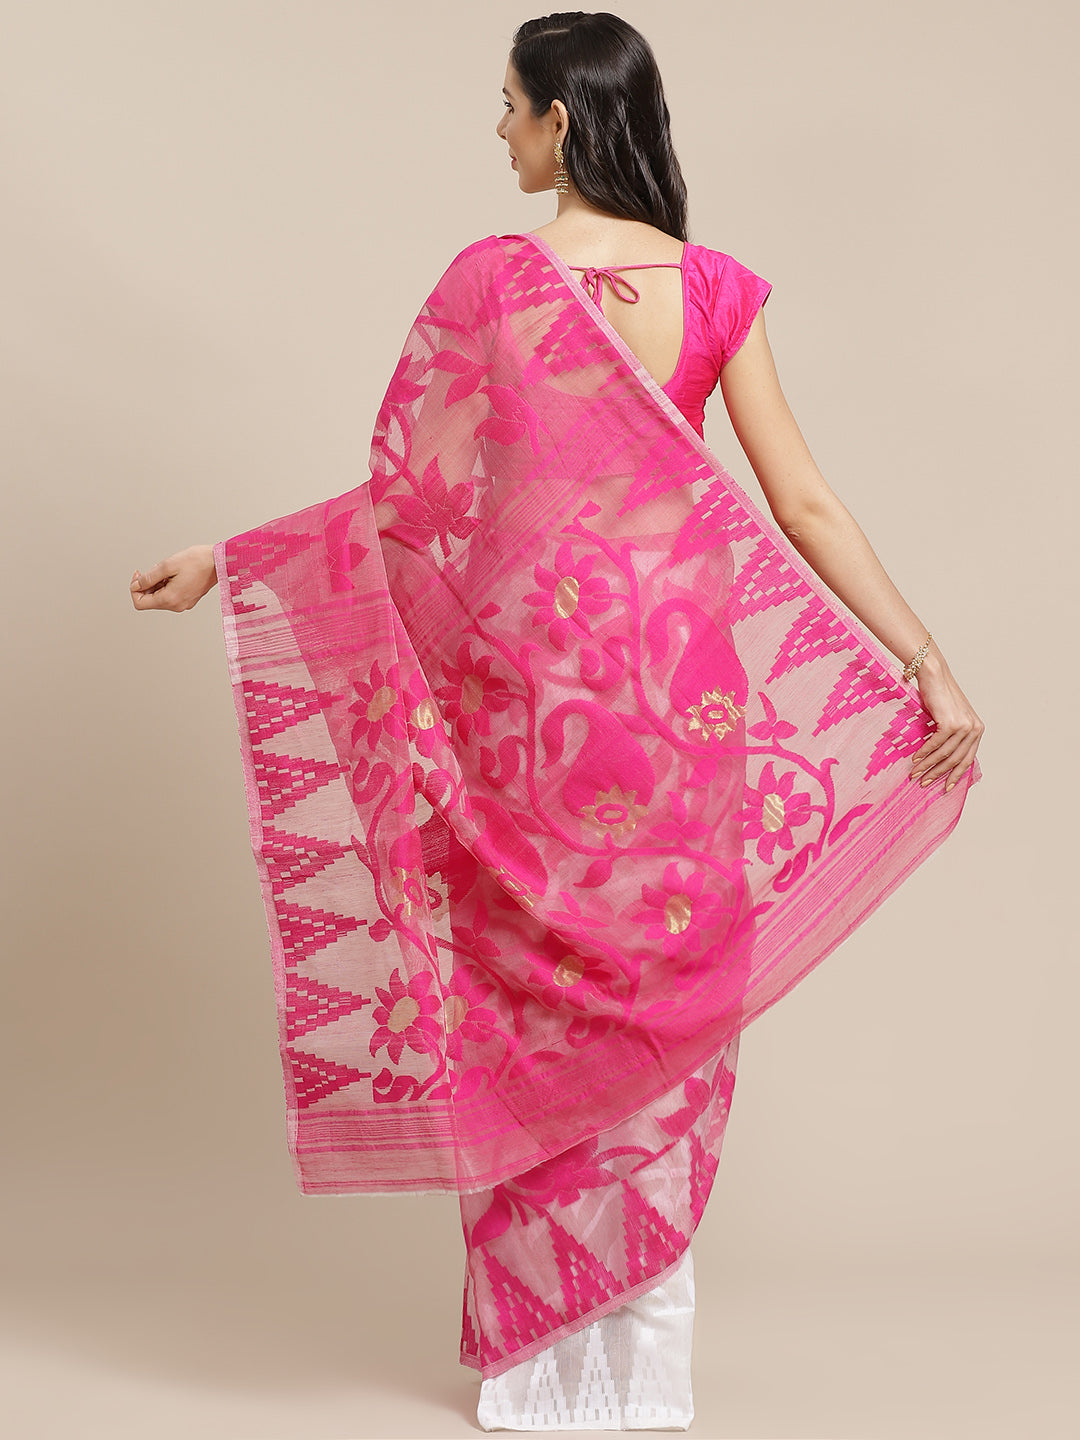 Pink and White, Kalakari India Jamdani Silk Cotton Woven Design Saree without blouse CHBHSA0004-Saree-Kalakari India-CHBHSA0004-Bengal, Geographical Indication, Hand Crafted, Hand Painted, Heritage Prints, Jamdani, Natural Dyes, Red, Sarees, Silk Blended, Sustainable Fabrics, Woven, Yellow-[Linen,Ethnic,wear,Fashionista,Handloom,Handicraft,Indigo,blockprint,block,print,Cotton,Chanderi,Blue, latest,classy,party,bollywood,trendy,summer,style,traditional,formal,elegant,unique,style,hand,block,print